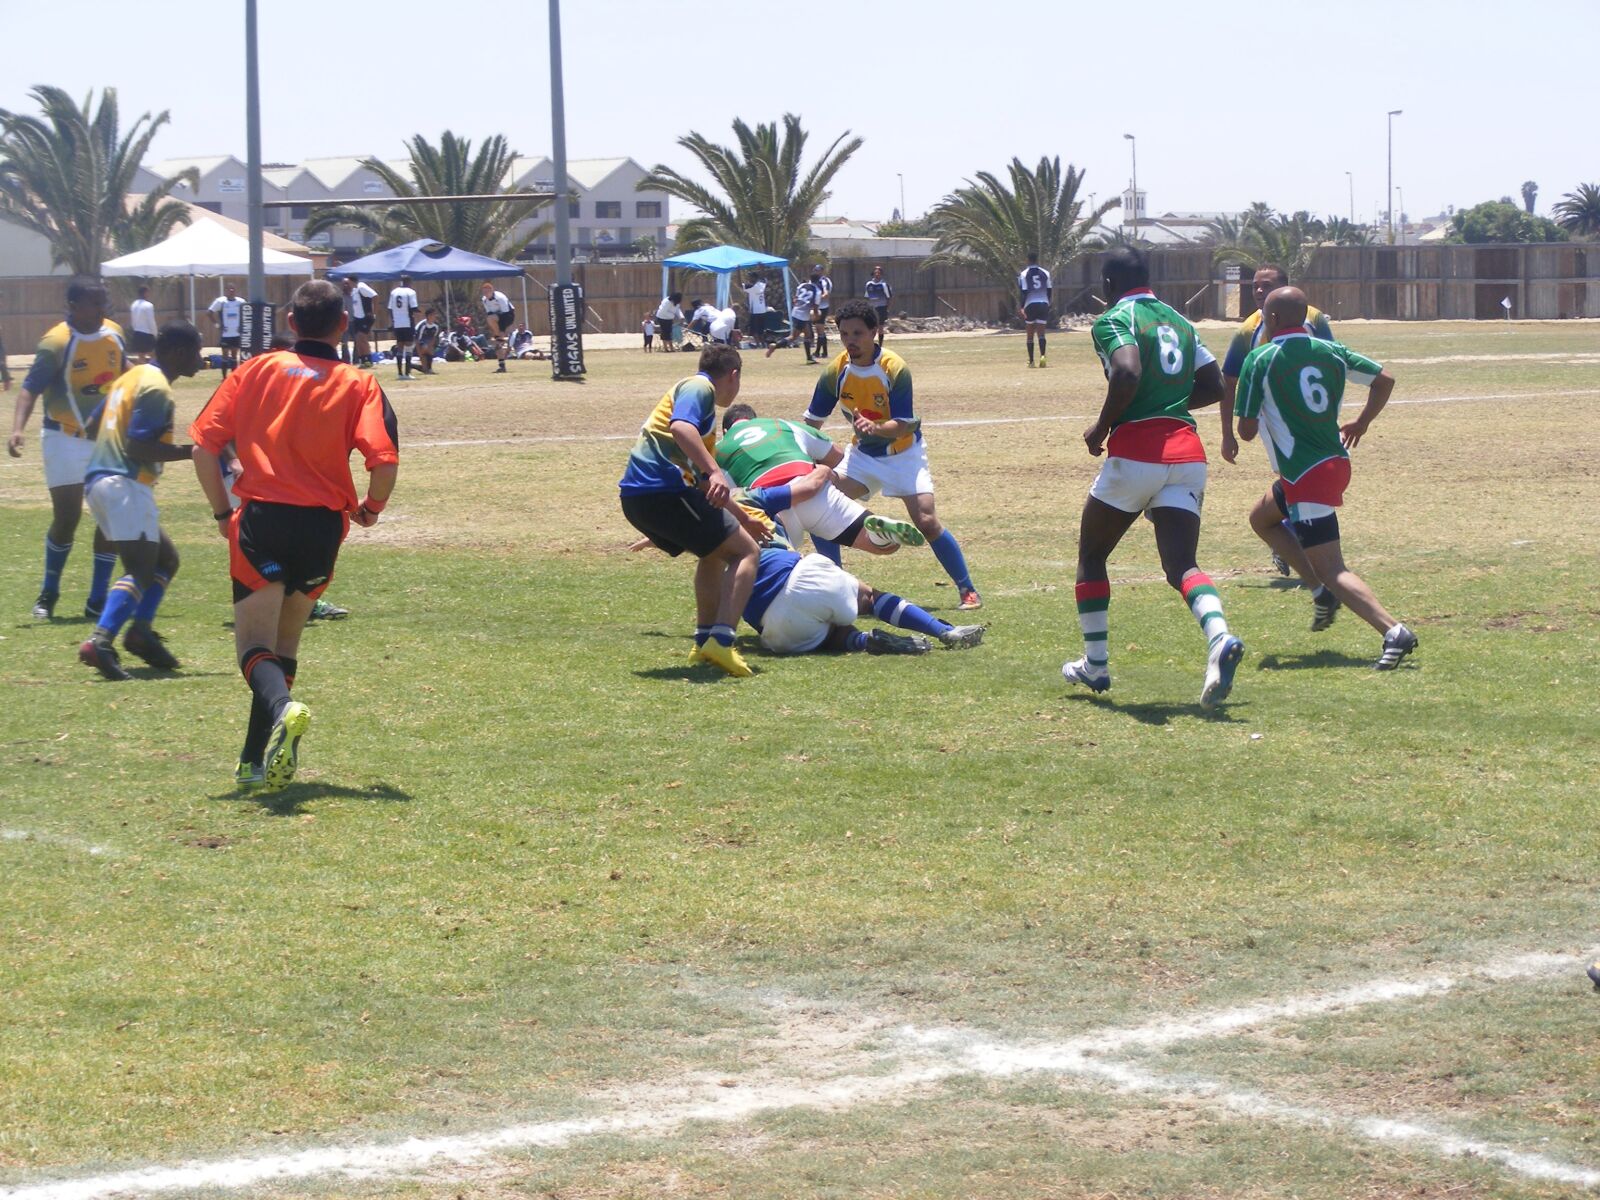 Fujifilm FinePix S5700 S700 sample photo. Rugby, african, african rugby photography